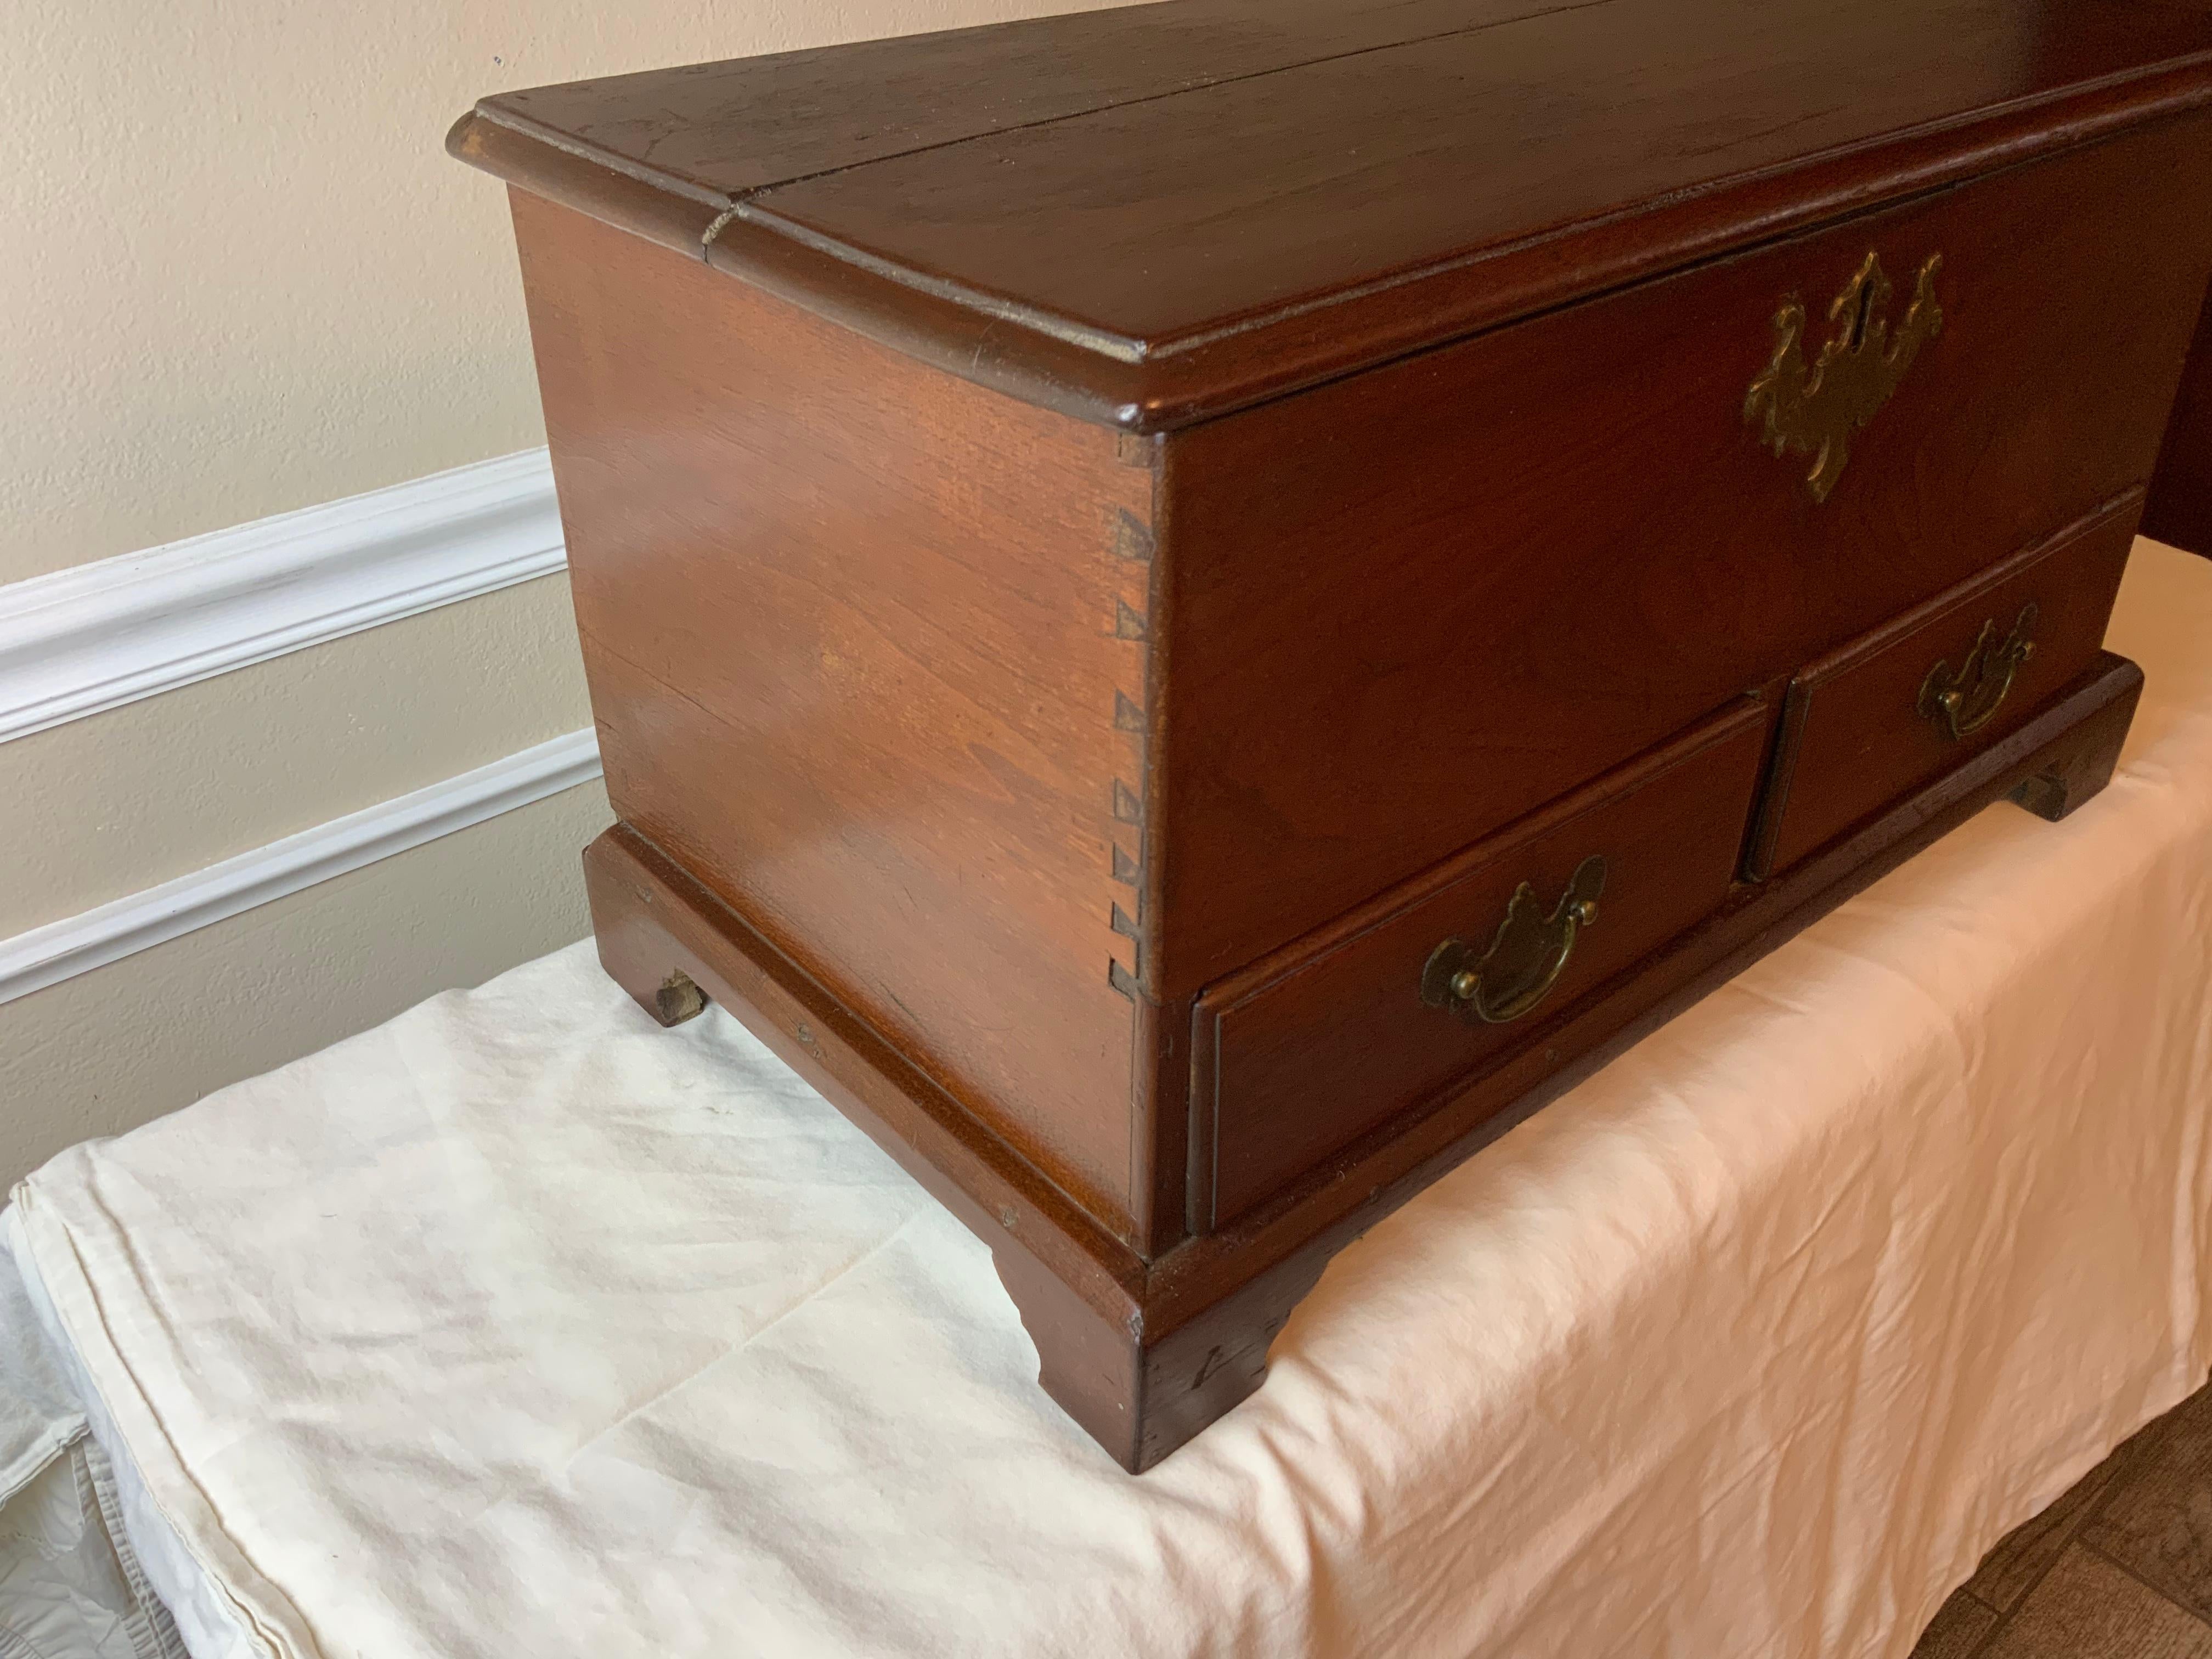 18th Century diminutive or child’s size Walnut Queen Anne blanket chest likely of Virginia or Pennsylvania origin.  This is a very nicely proportioned piece with great character.  The lock and brasses which although look to be period could be later